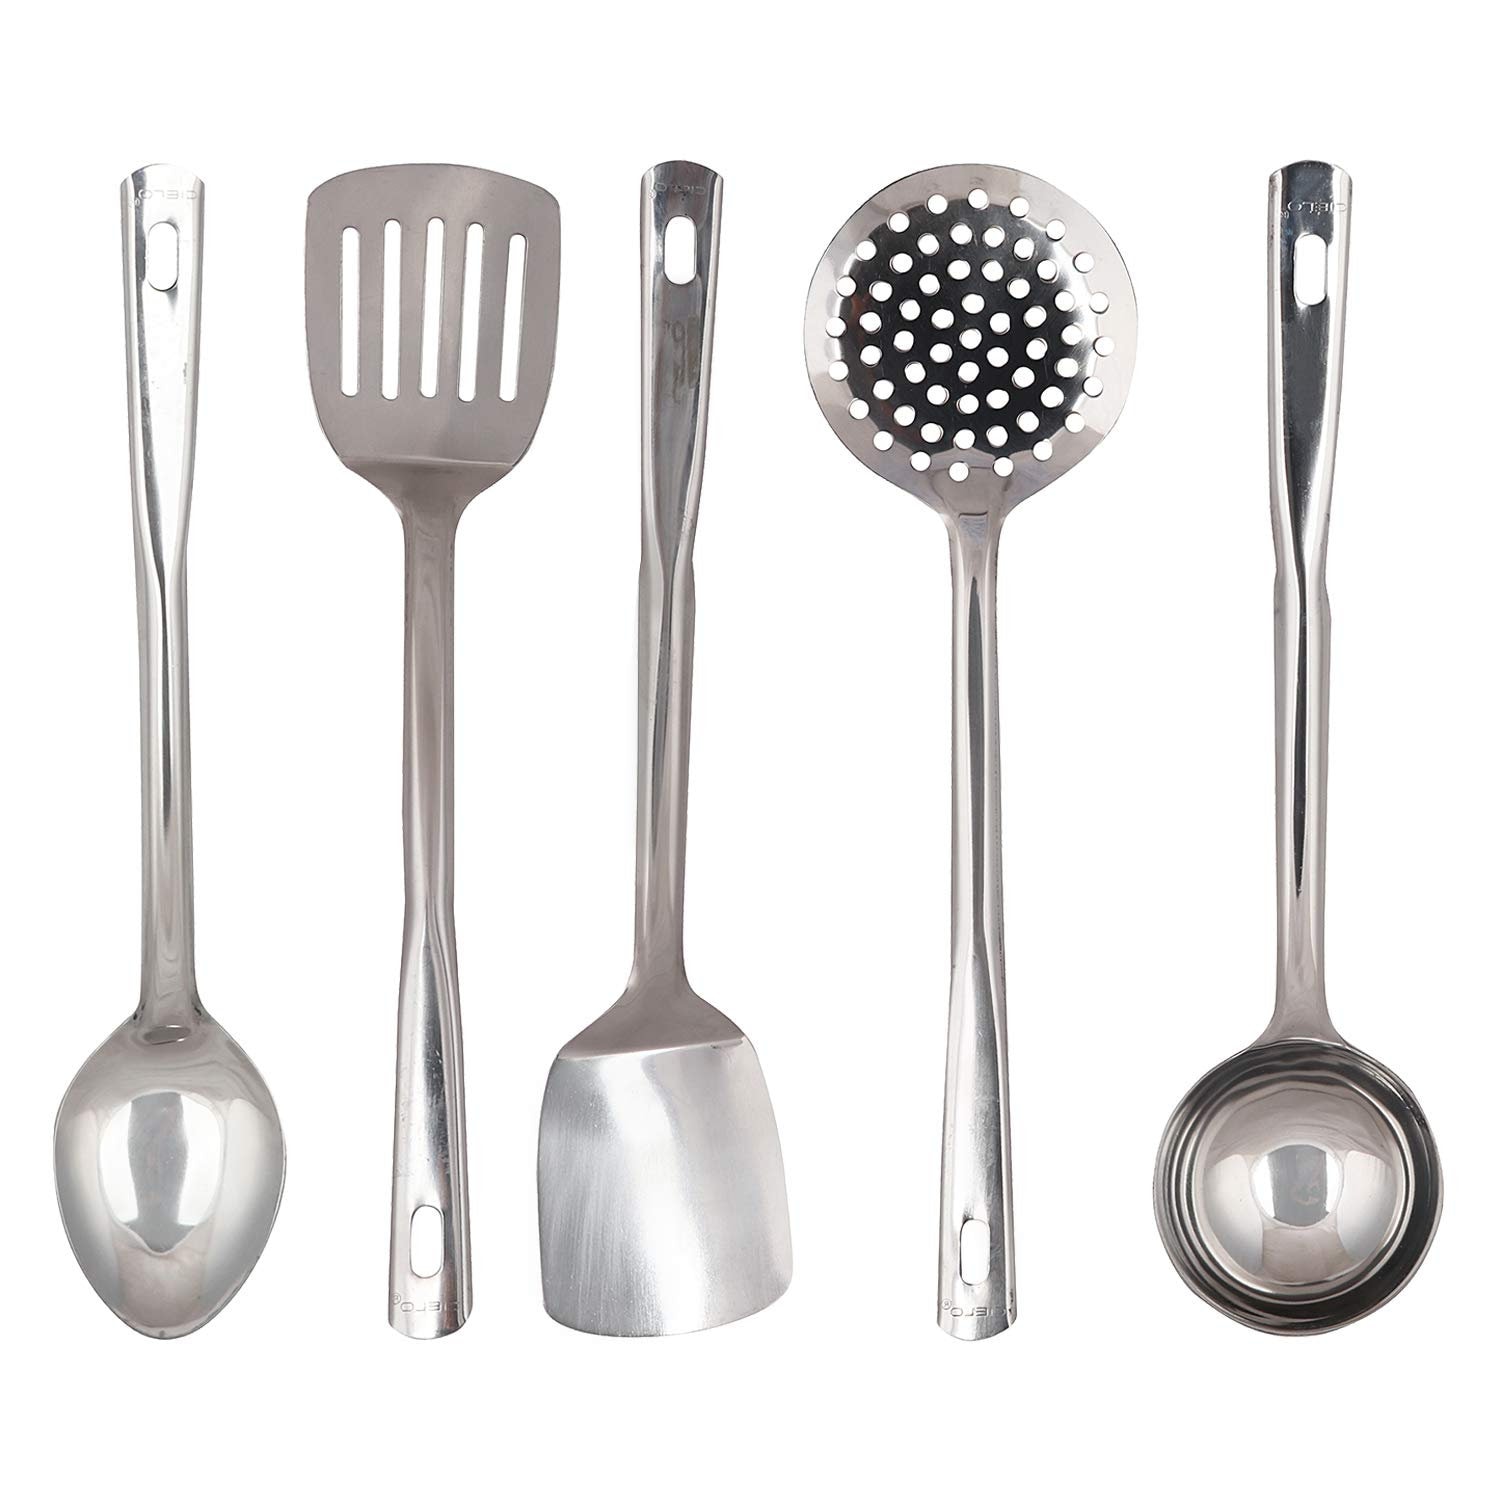 4pcs Home Kitchen Cooking Stainless Steel Kitchenware